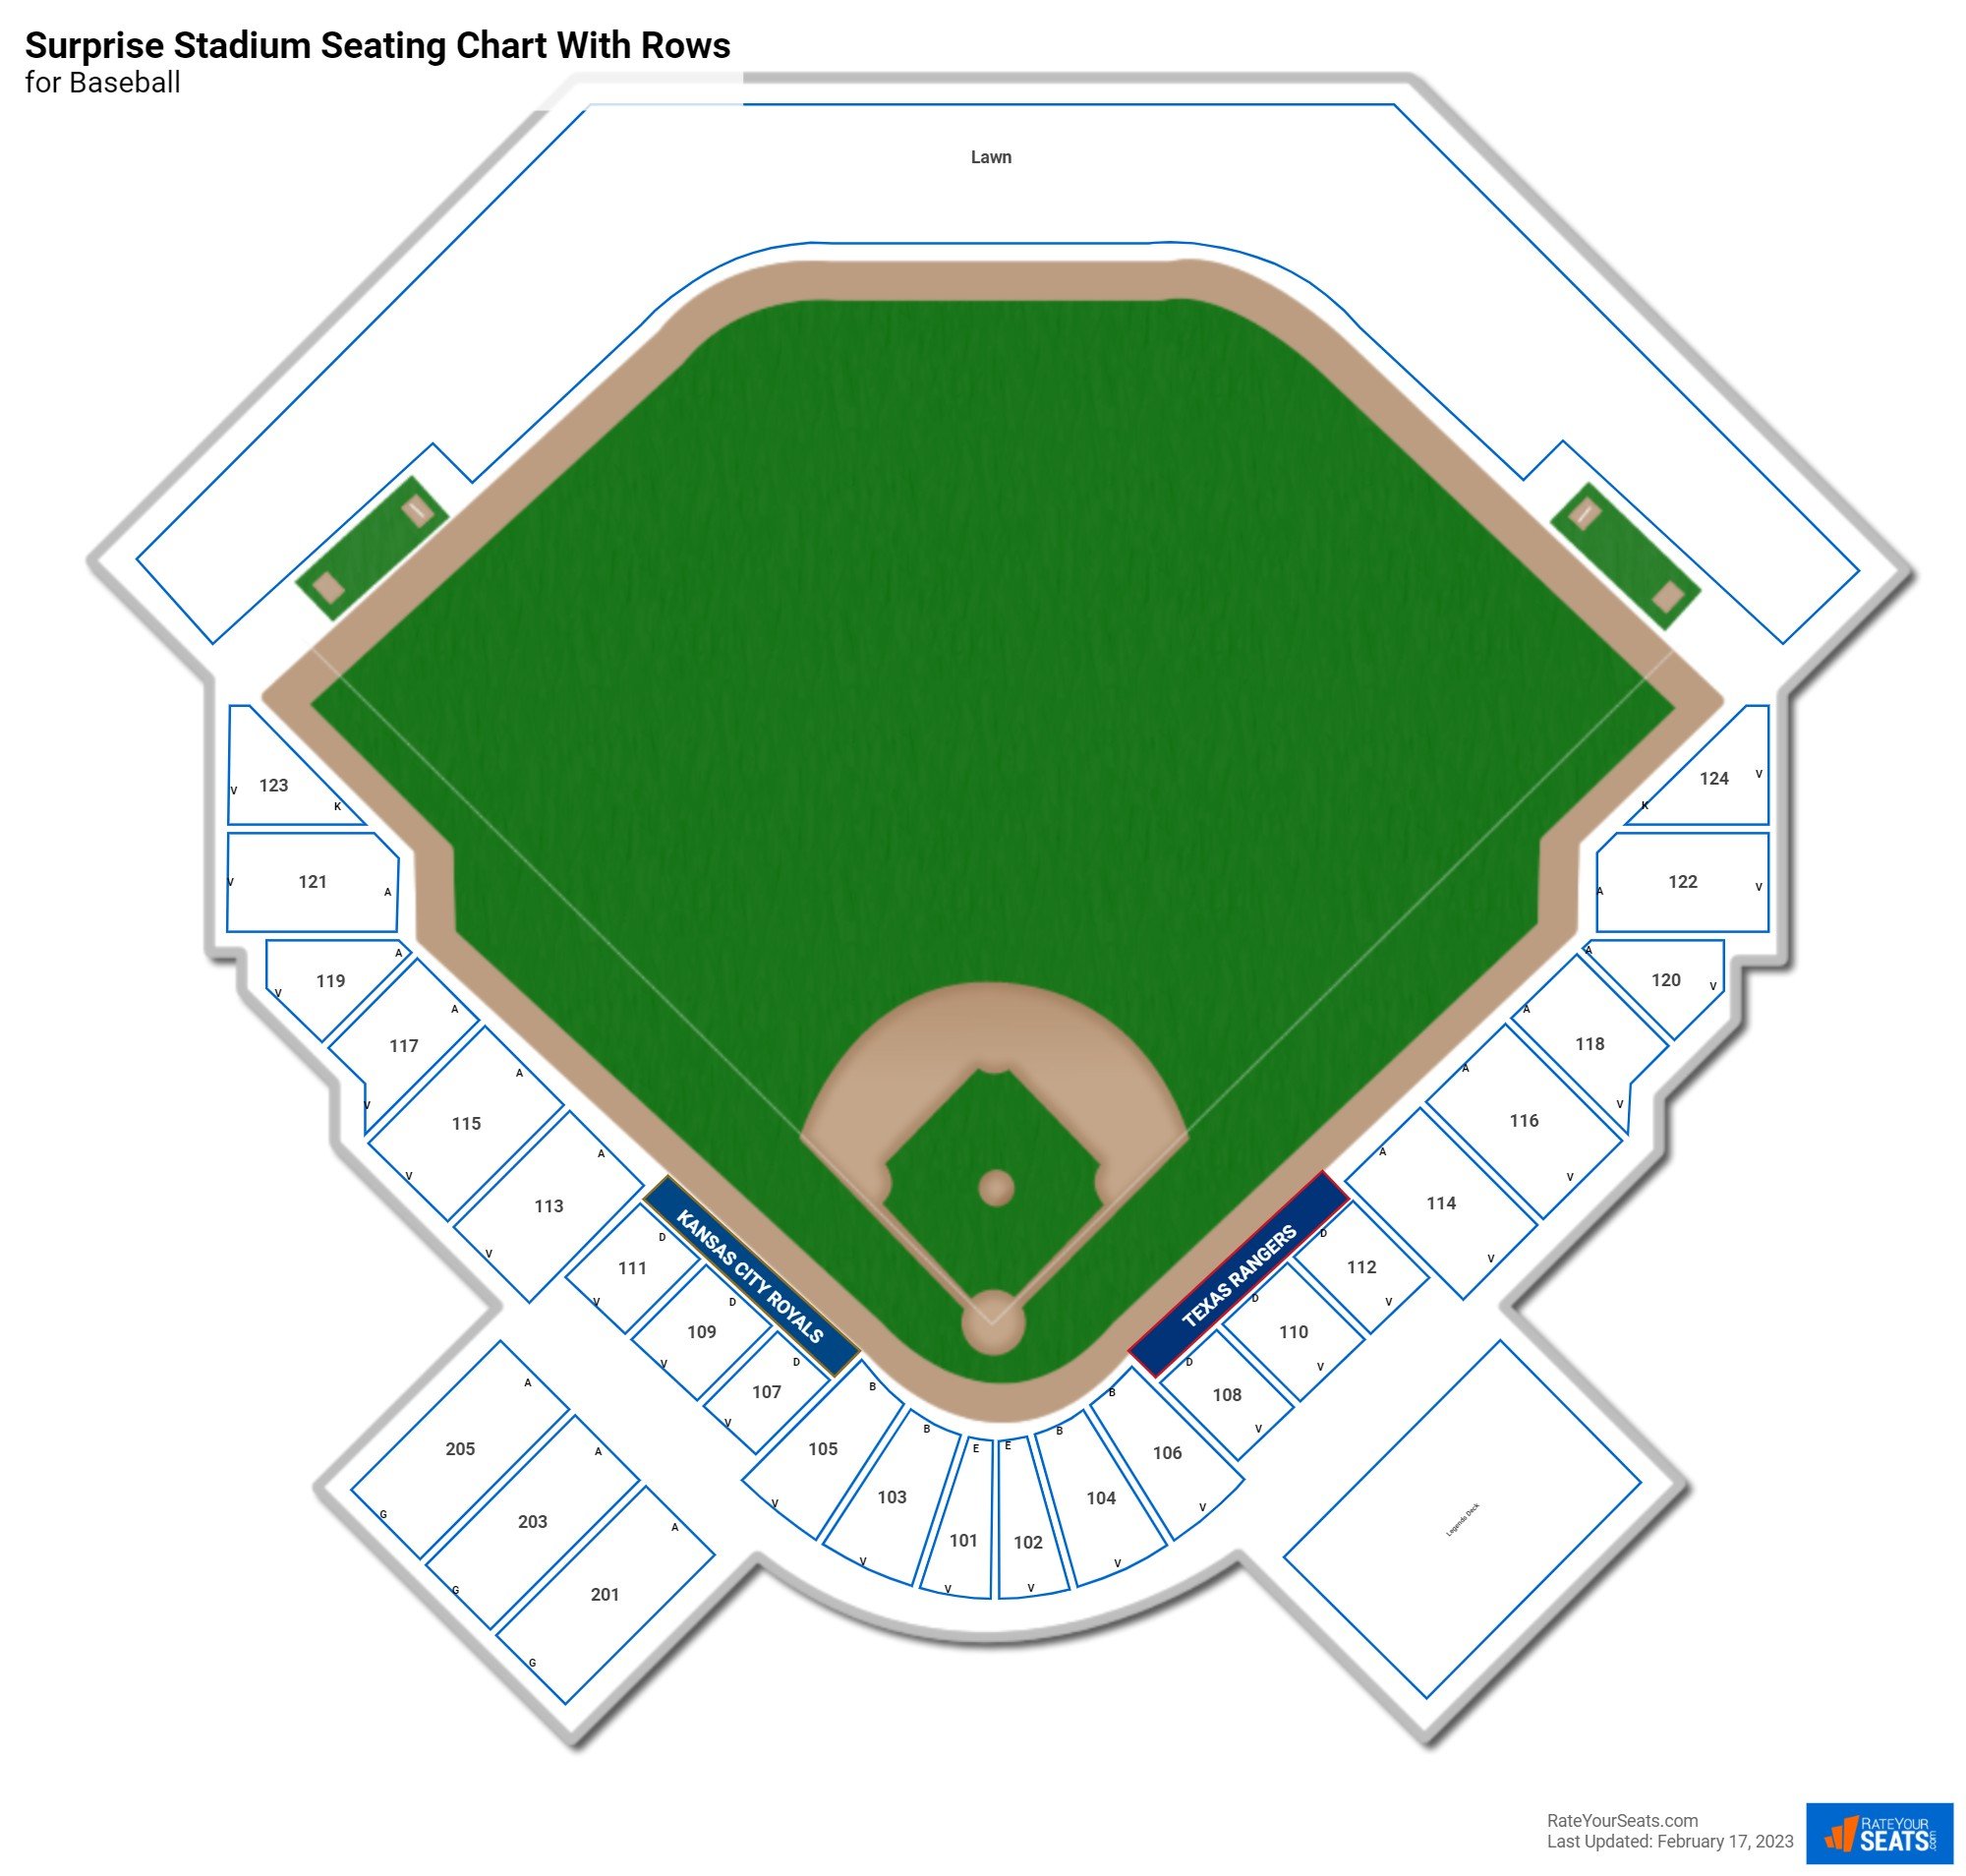 Surprise Stadium seating chart with row numbers